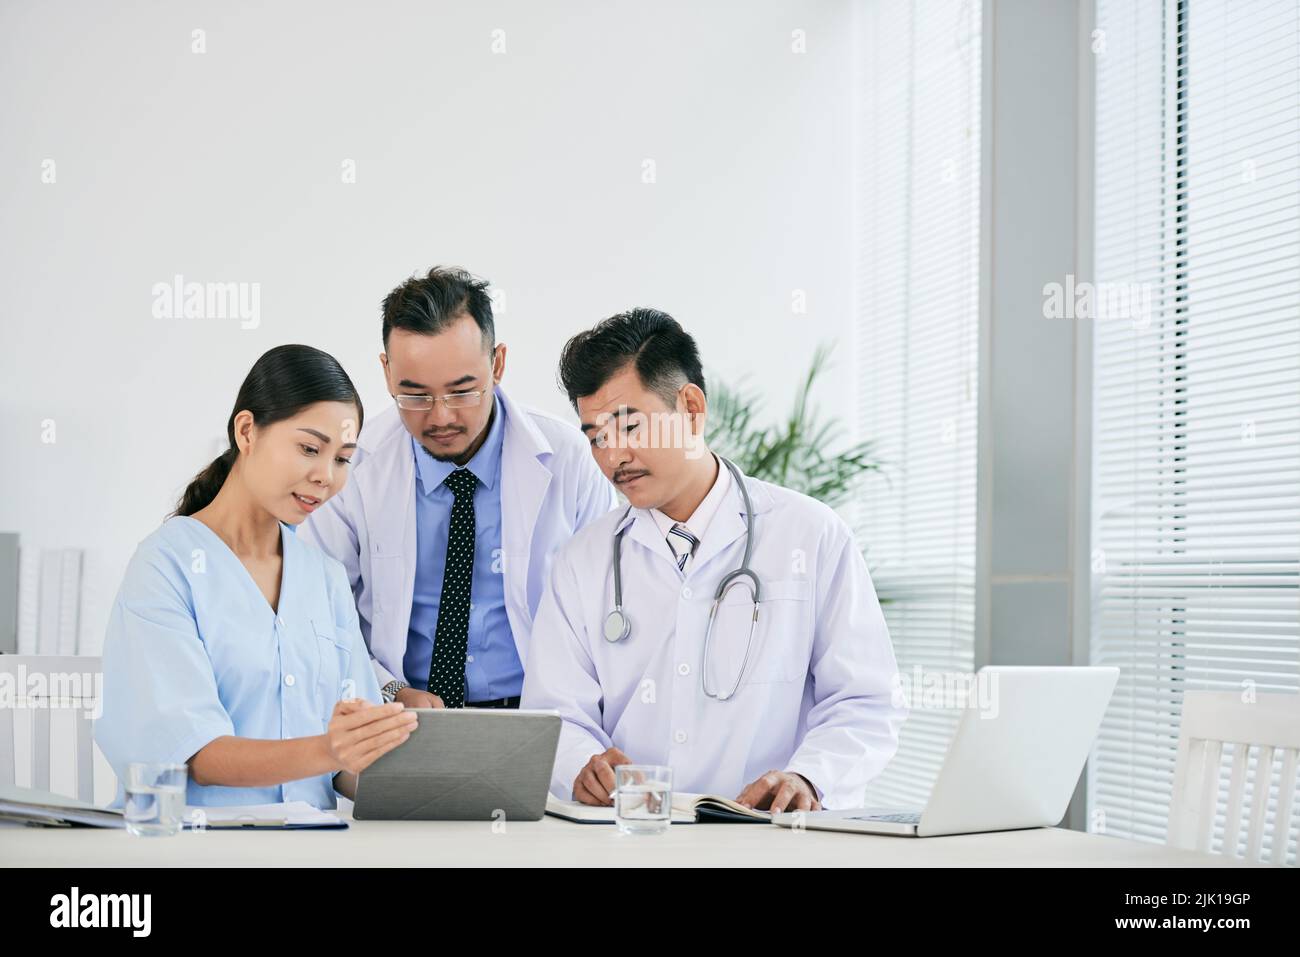 Asian team of medical workers discussing information on tablet computer Stock Photo